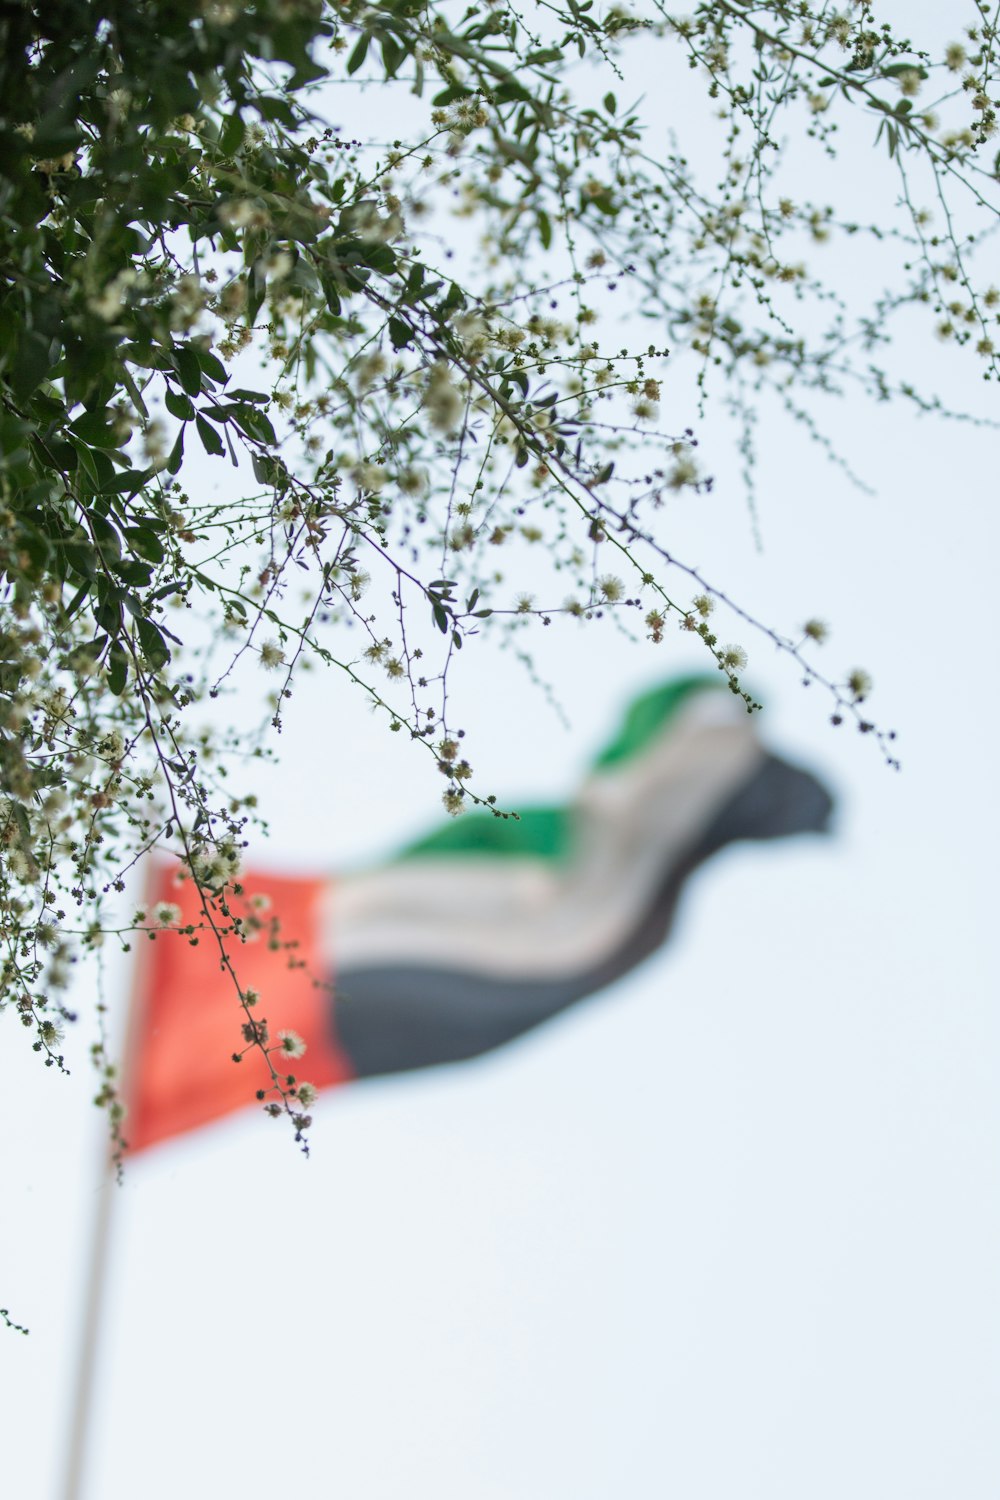 a flag flying in the wind next to a tree